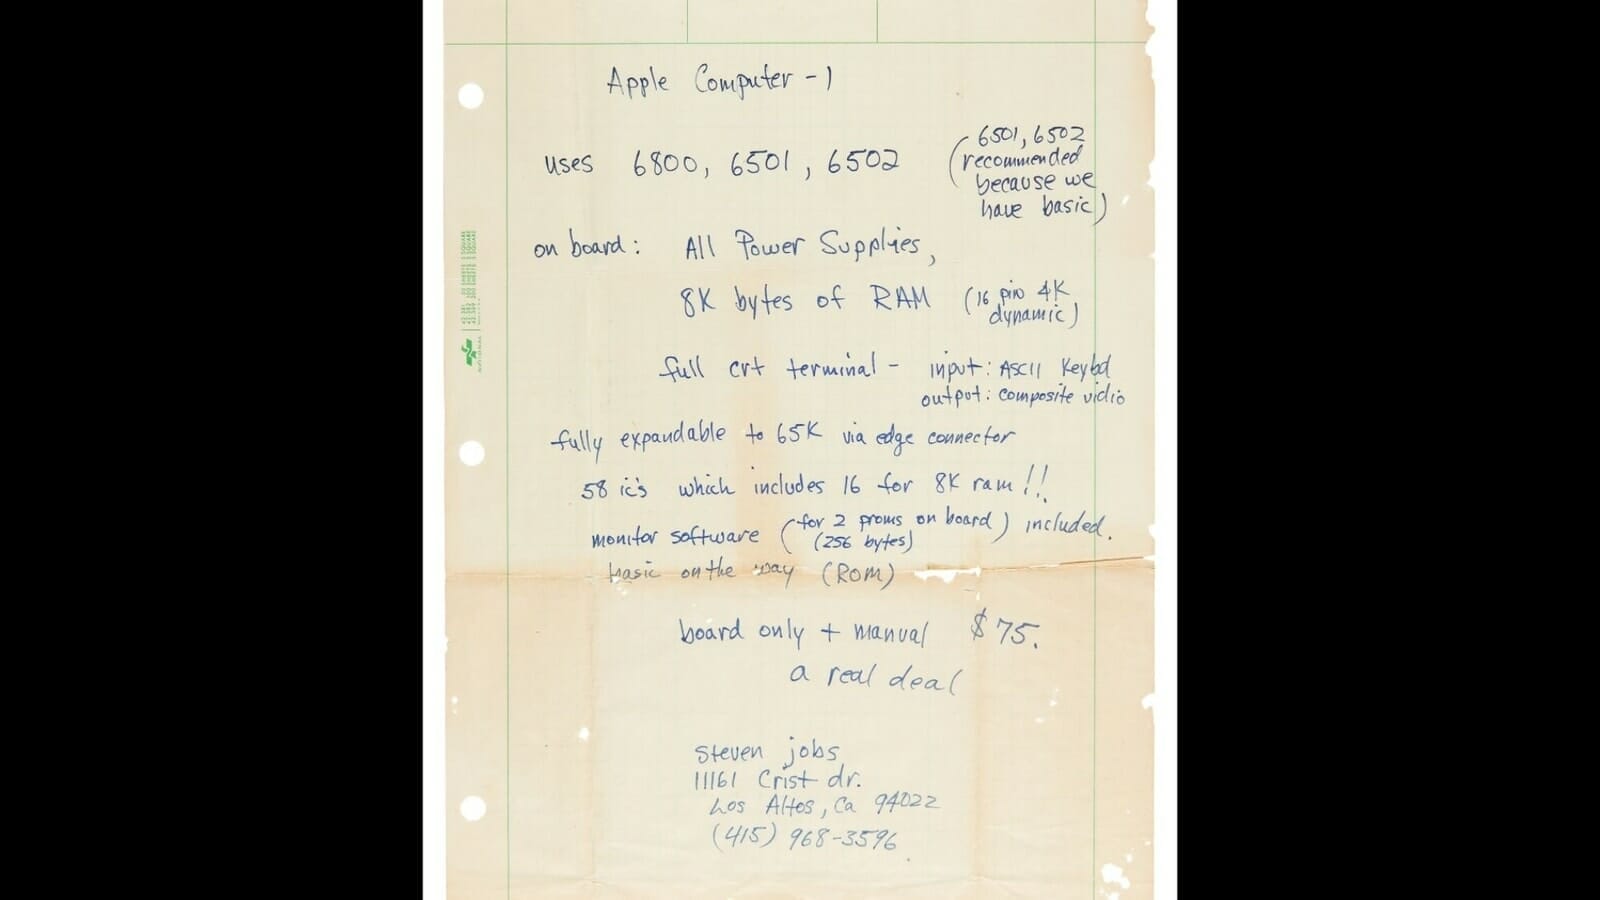 Steve Jobs’ rare handwritten Apple-1 ad sells for a whopping 1.4 crore at auction